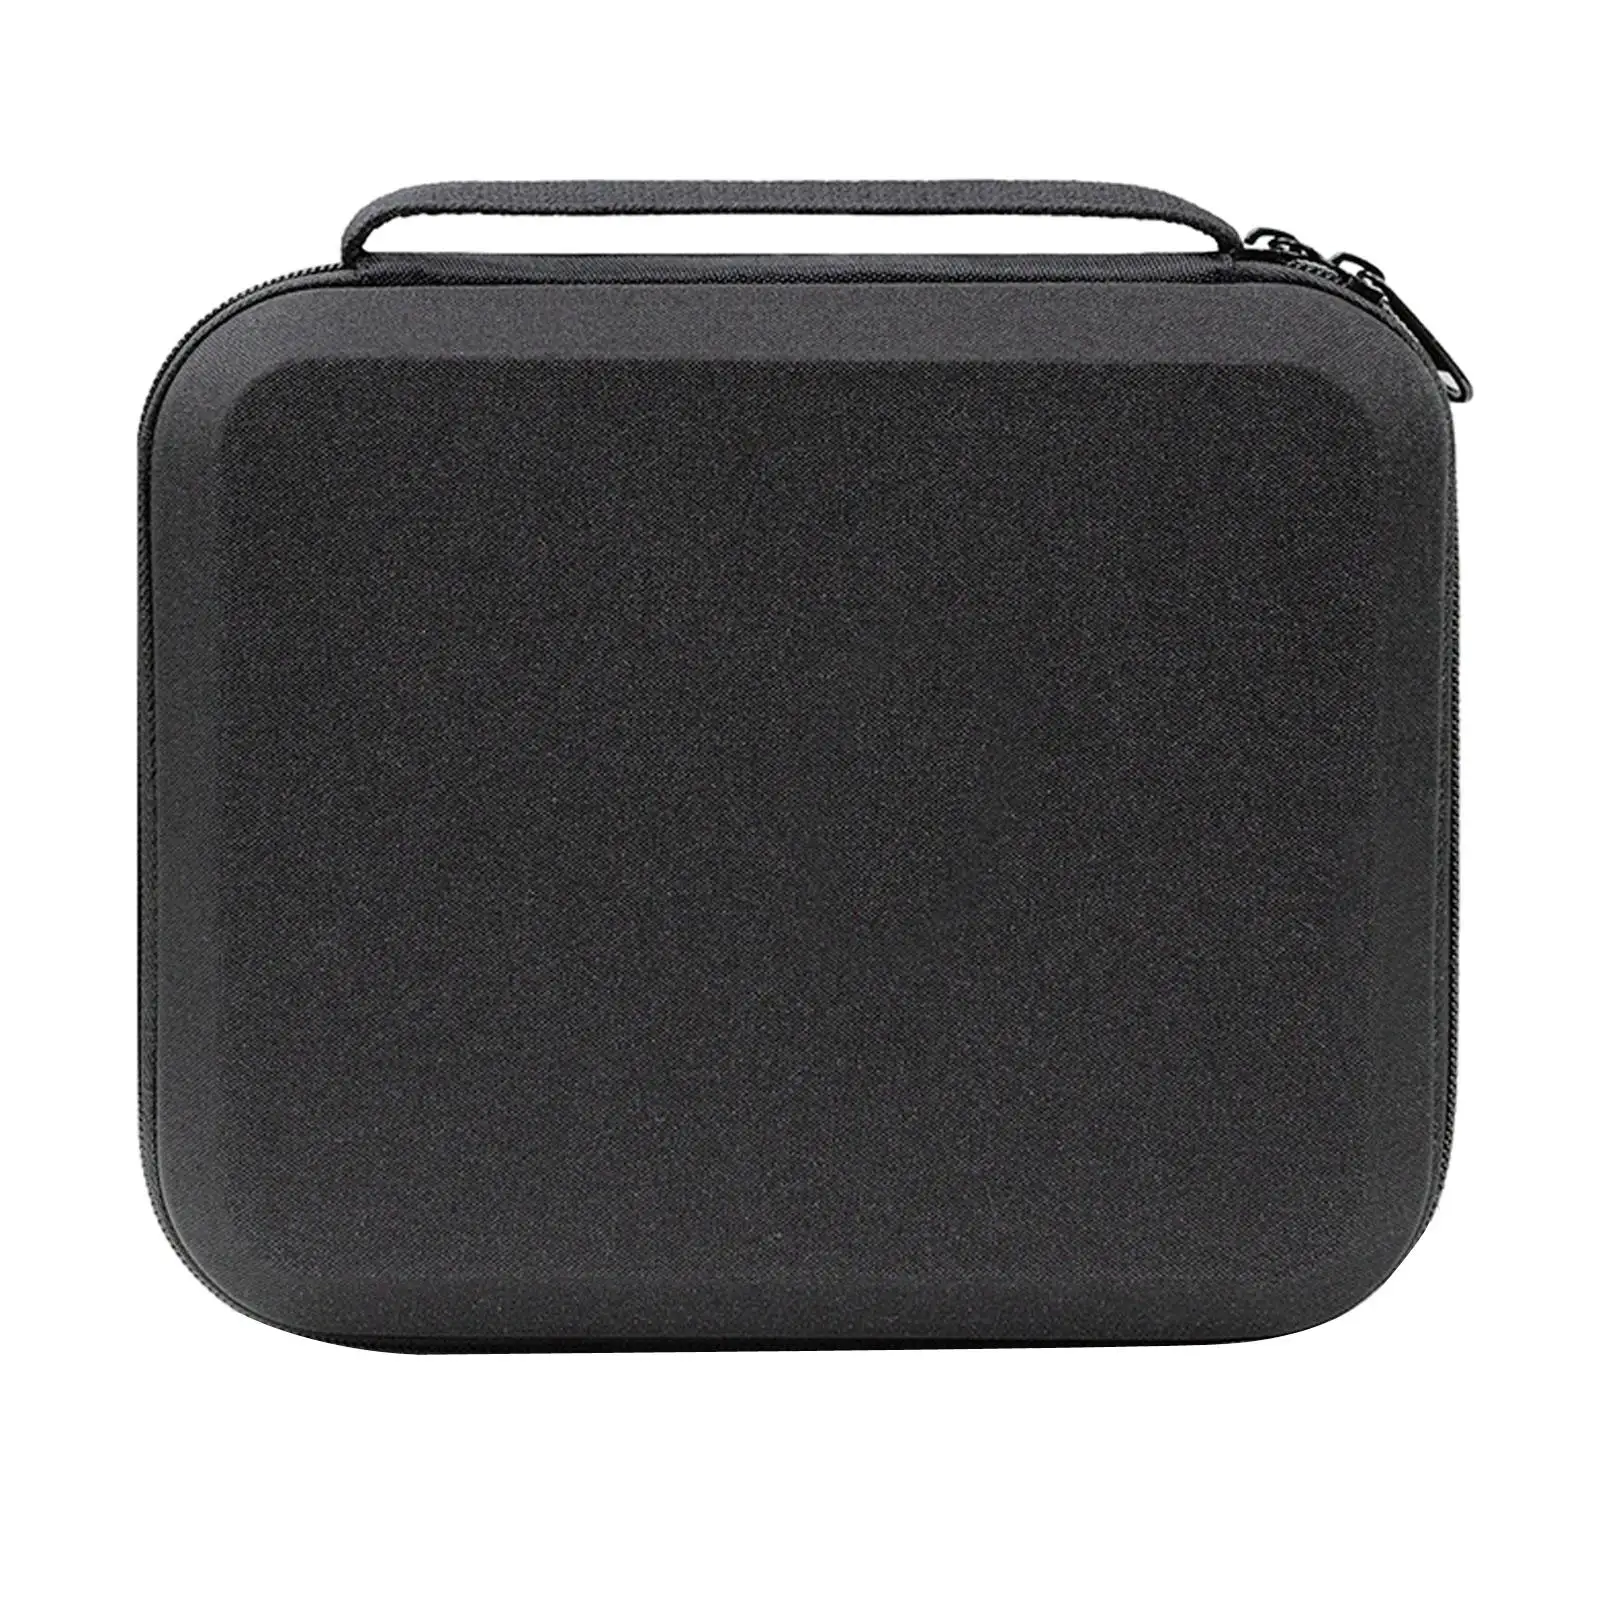 Travel Drone Carrying Case with Handle Handbag Box Travel Case Storage Box Suitcase Storage Bag for RC N1 RC Drone Parts